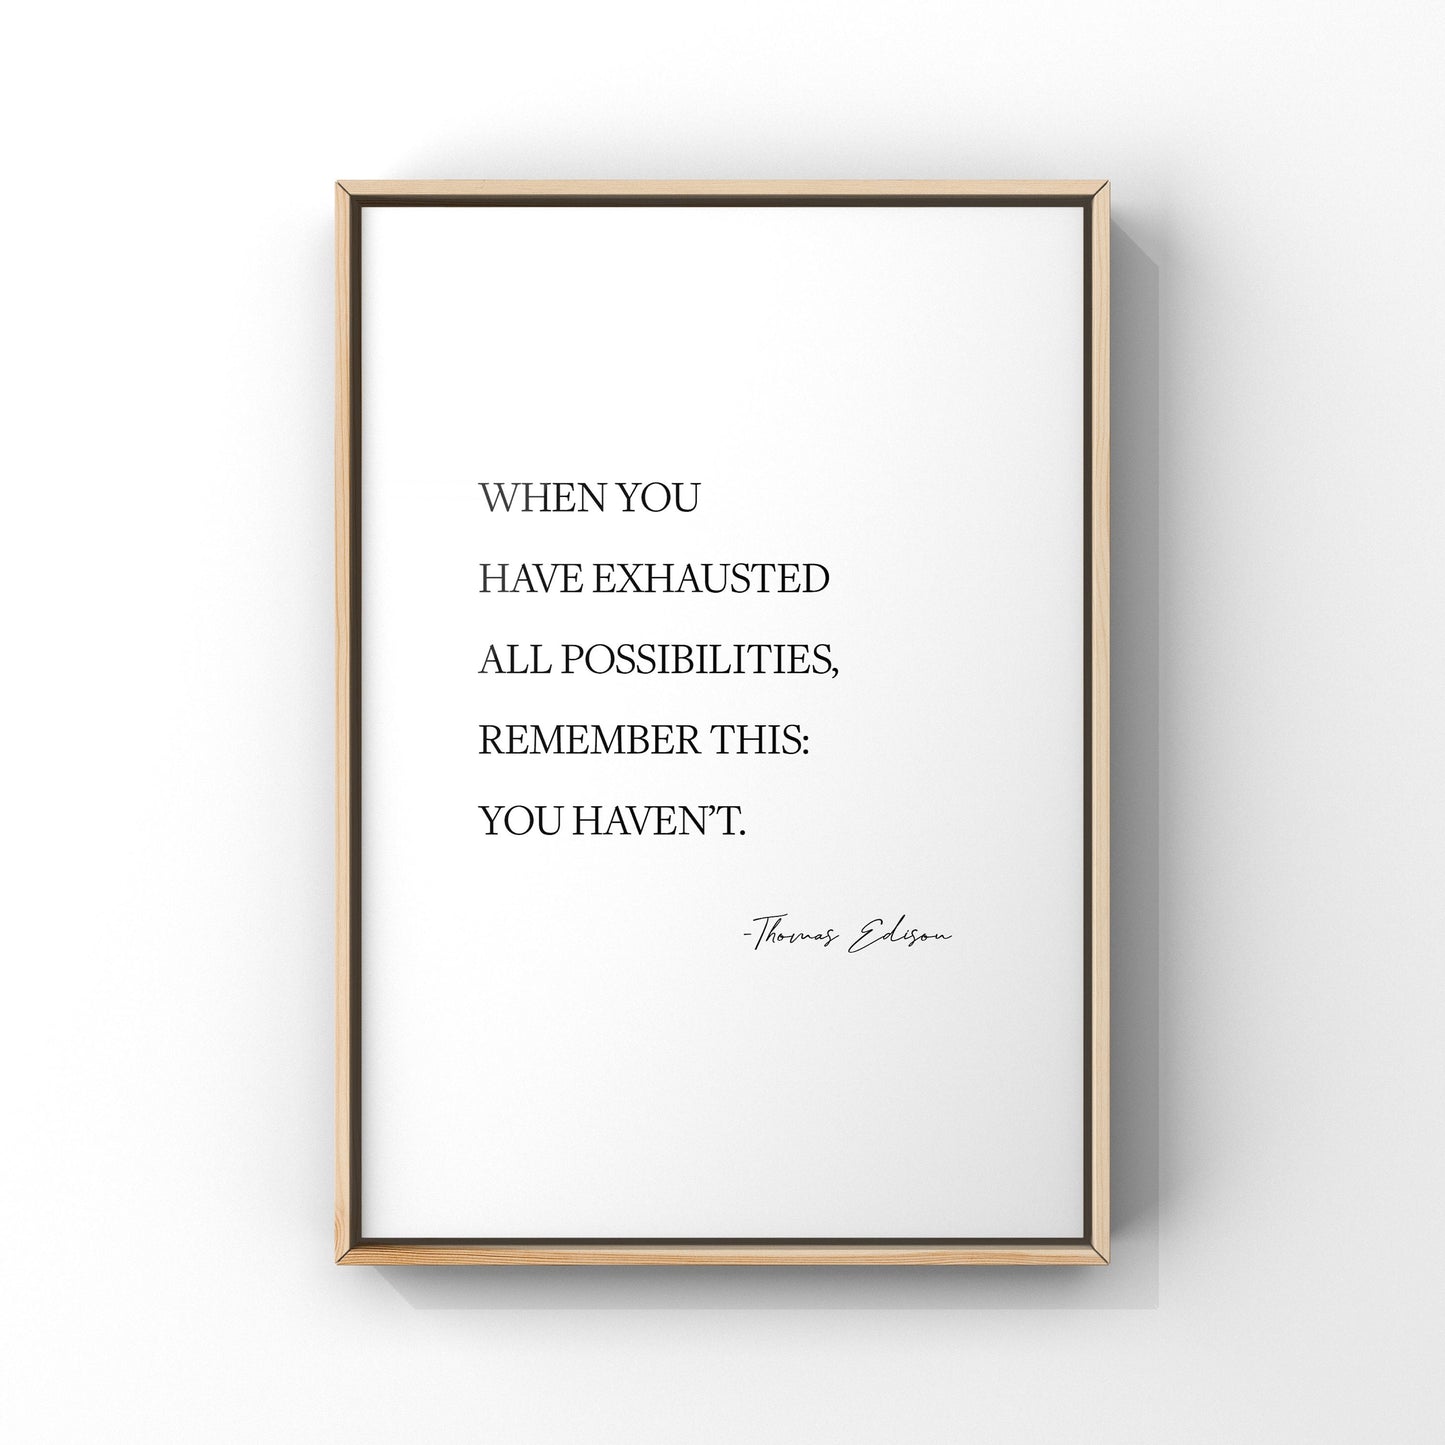 When you have exhausted all possibilities,Thomas Edison quote,Inspirational quote,Motivational print,Possibilities quote,Thomas Edison